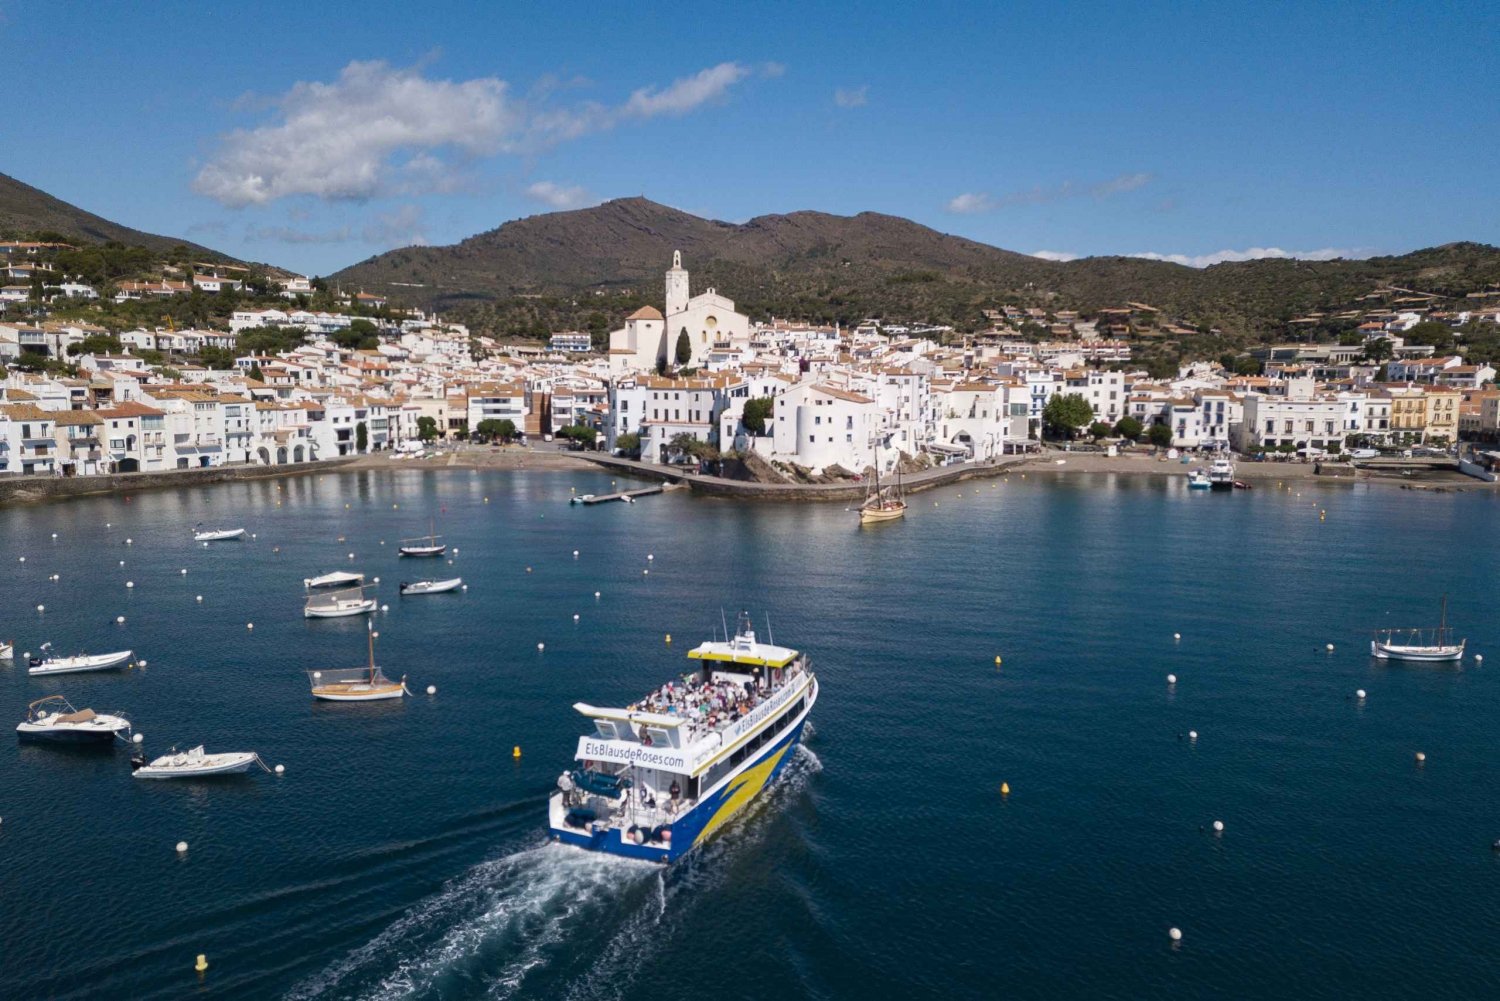 From Roses to Cadaqués: Catalonian Coast Boat Tour